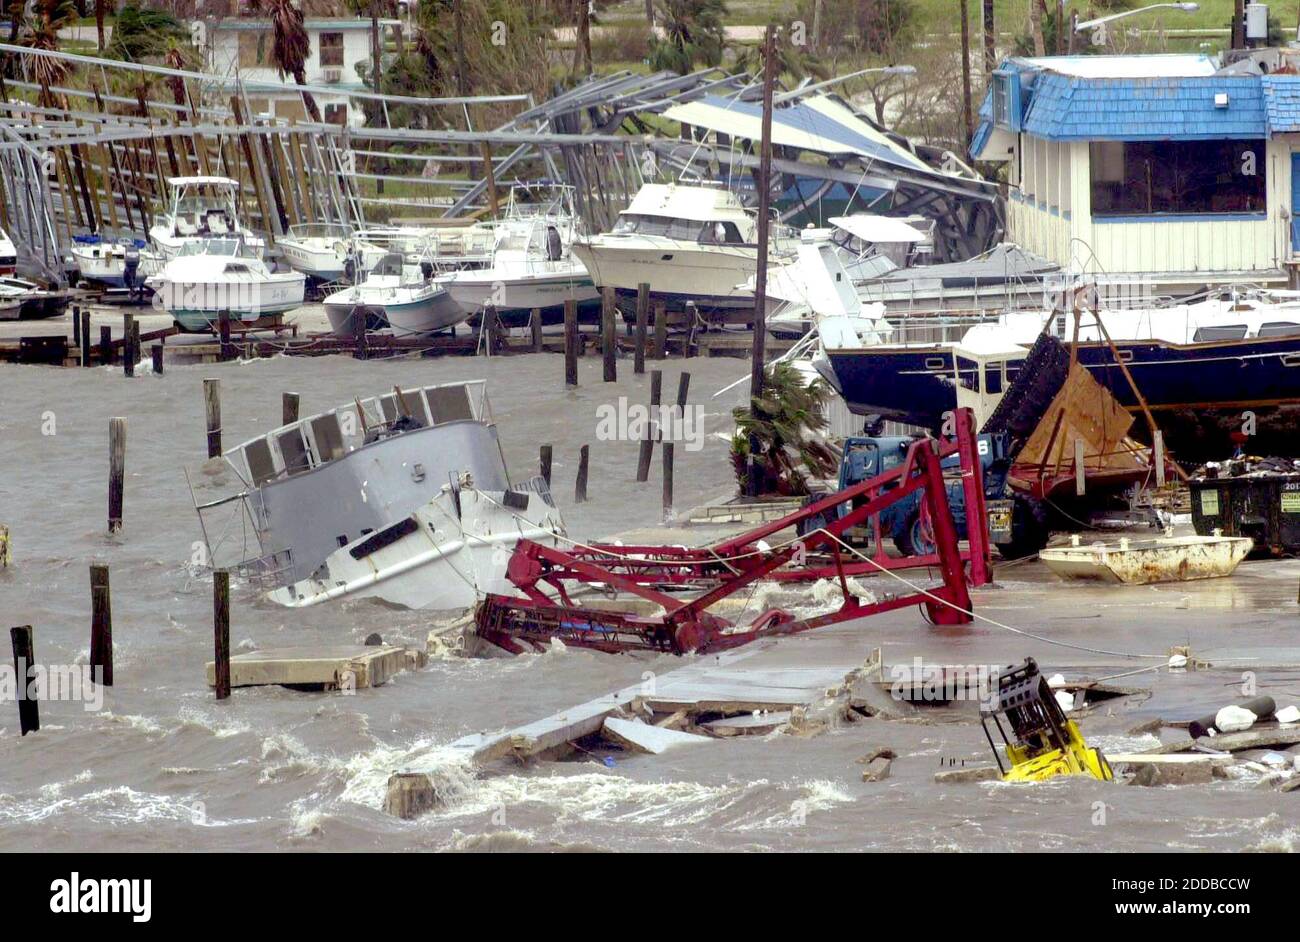 NO FILM, NO VIDEO, NO TV, NO DOCUMENTARY - A marina on the north side of the bridge headed for Hutchinson Island, Florida, took a strong hit after Hurricane Jeanne came ashore late in Fort Pierce on September 25, 2004. The area had already suffered heavy damage from Hurricane Frances three weeks ago. Photo by Peter Andrew Bosch/Miami Herald/KRT/ABACA. Stock Photo